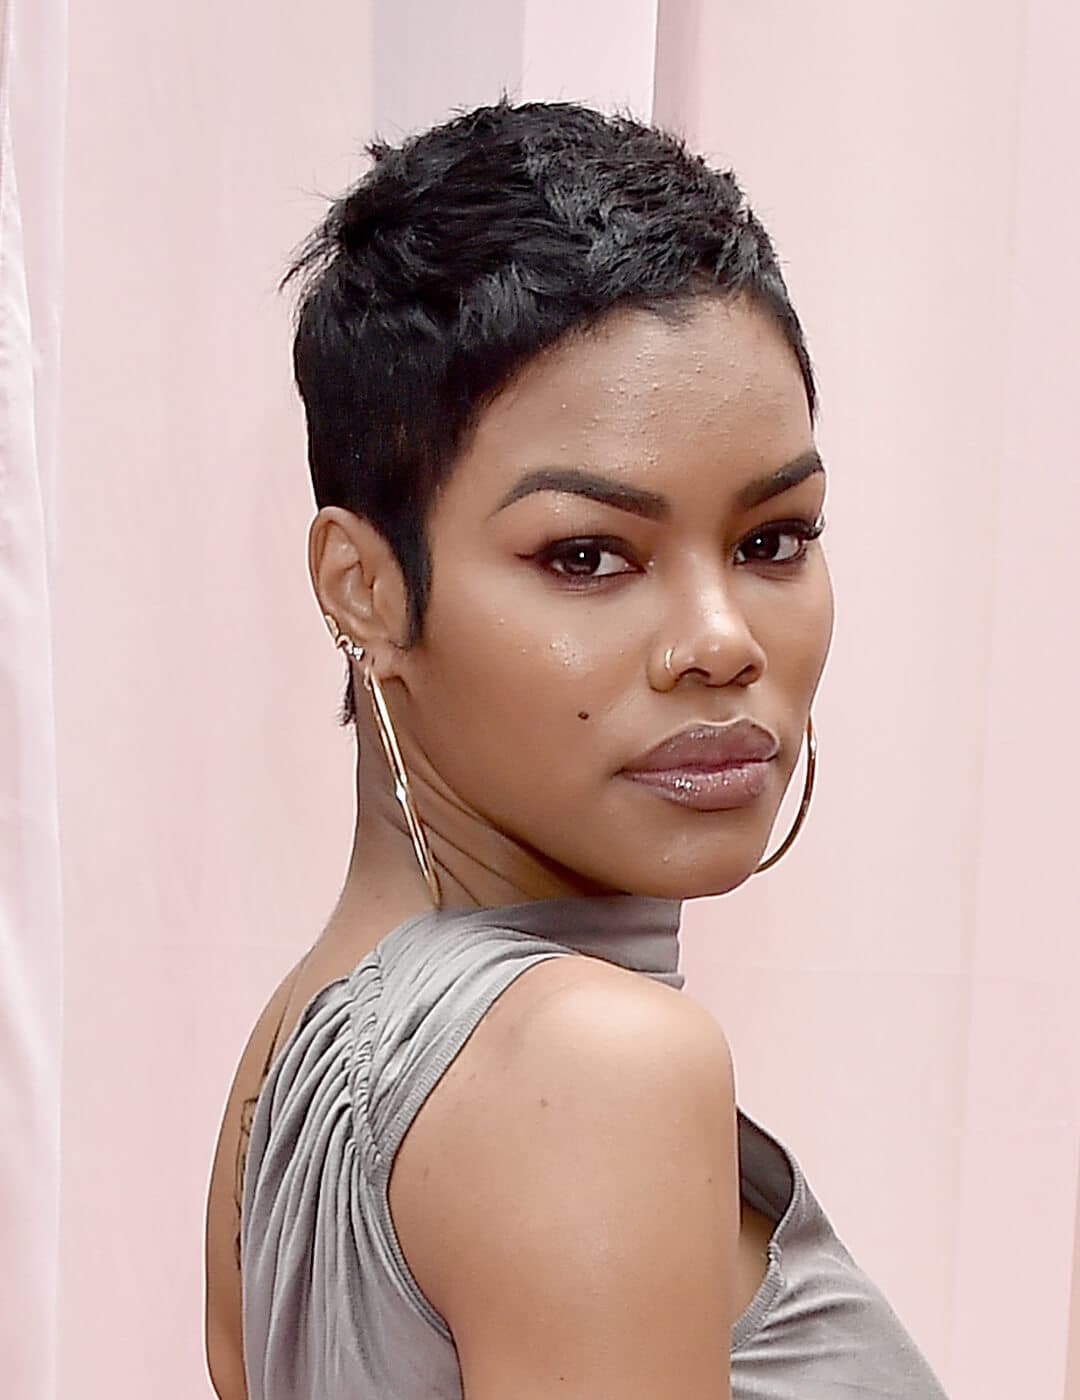 Teyana Taylor rocking her pixie cut hairstyle in a silver dress